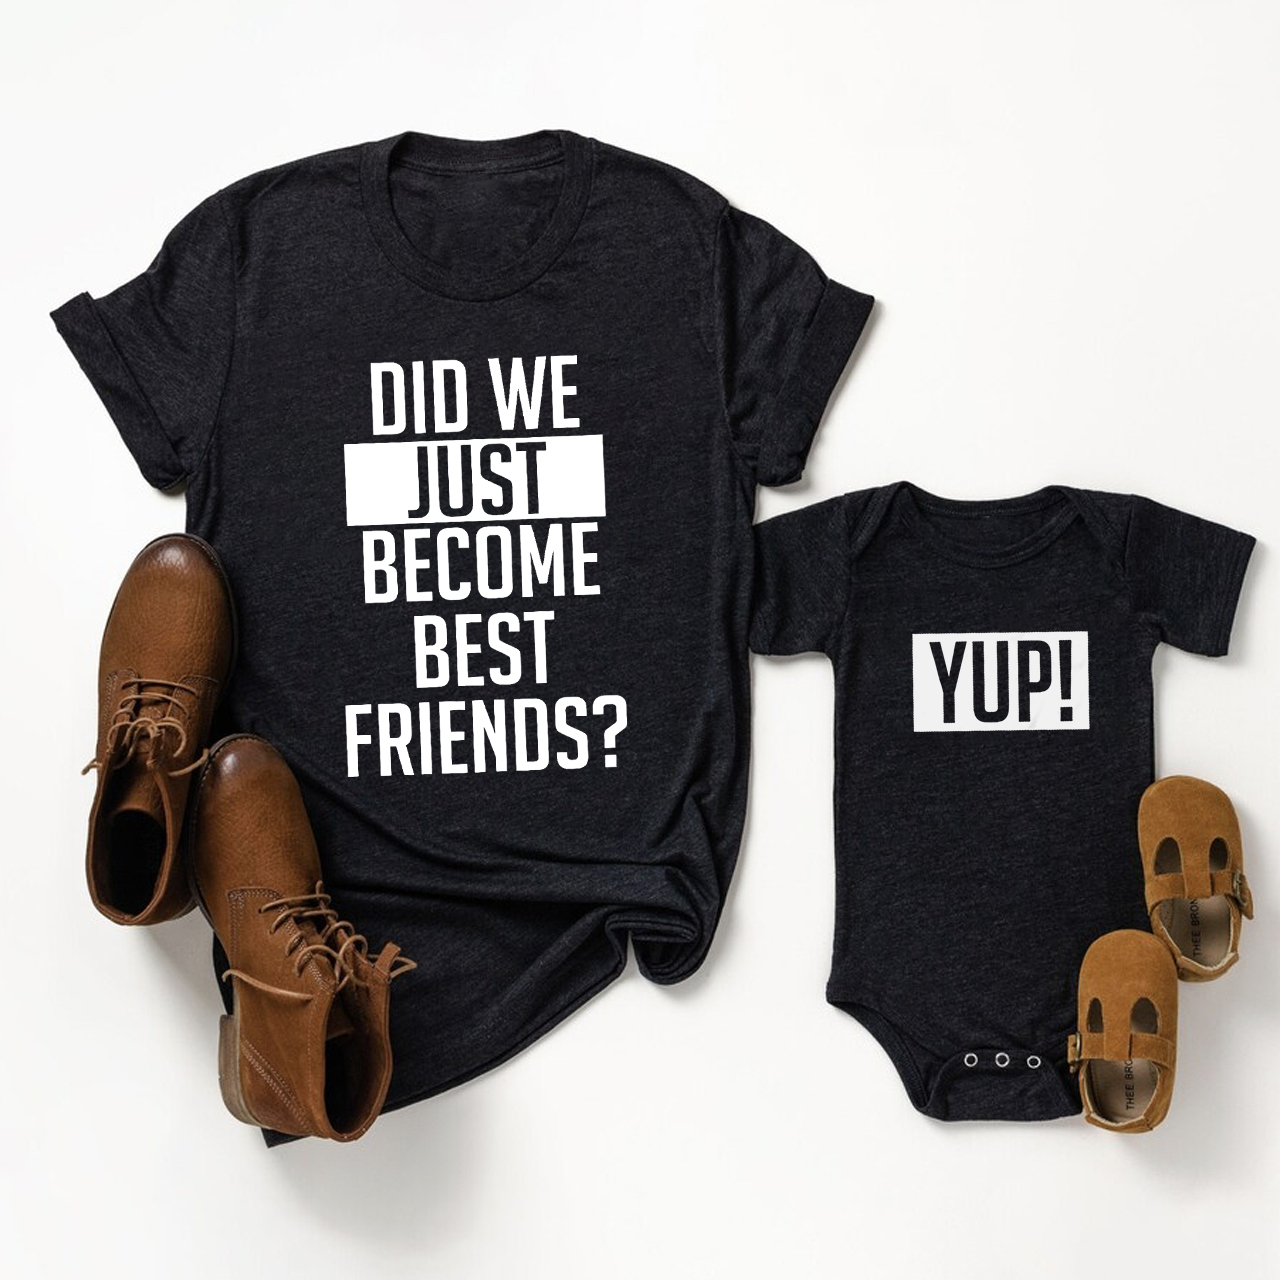 We sell high quality baby apparel !